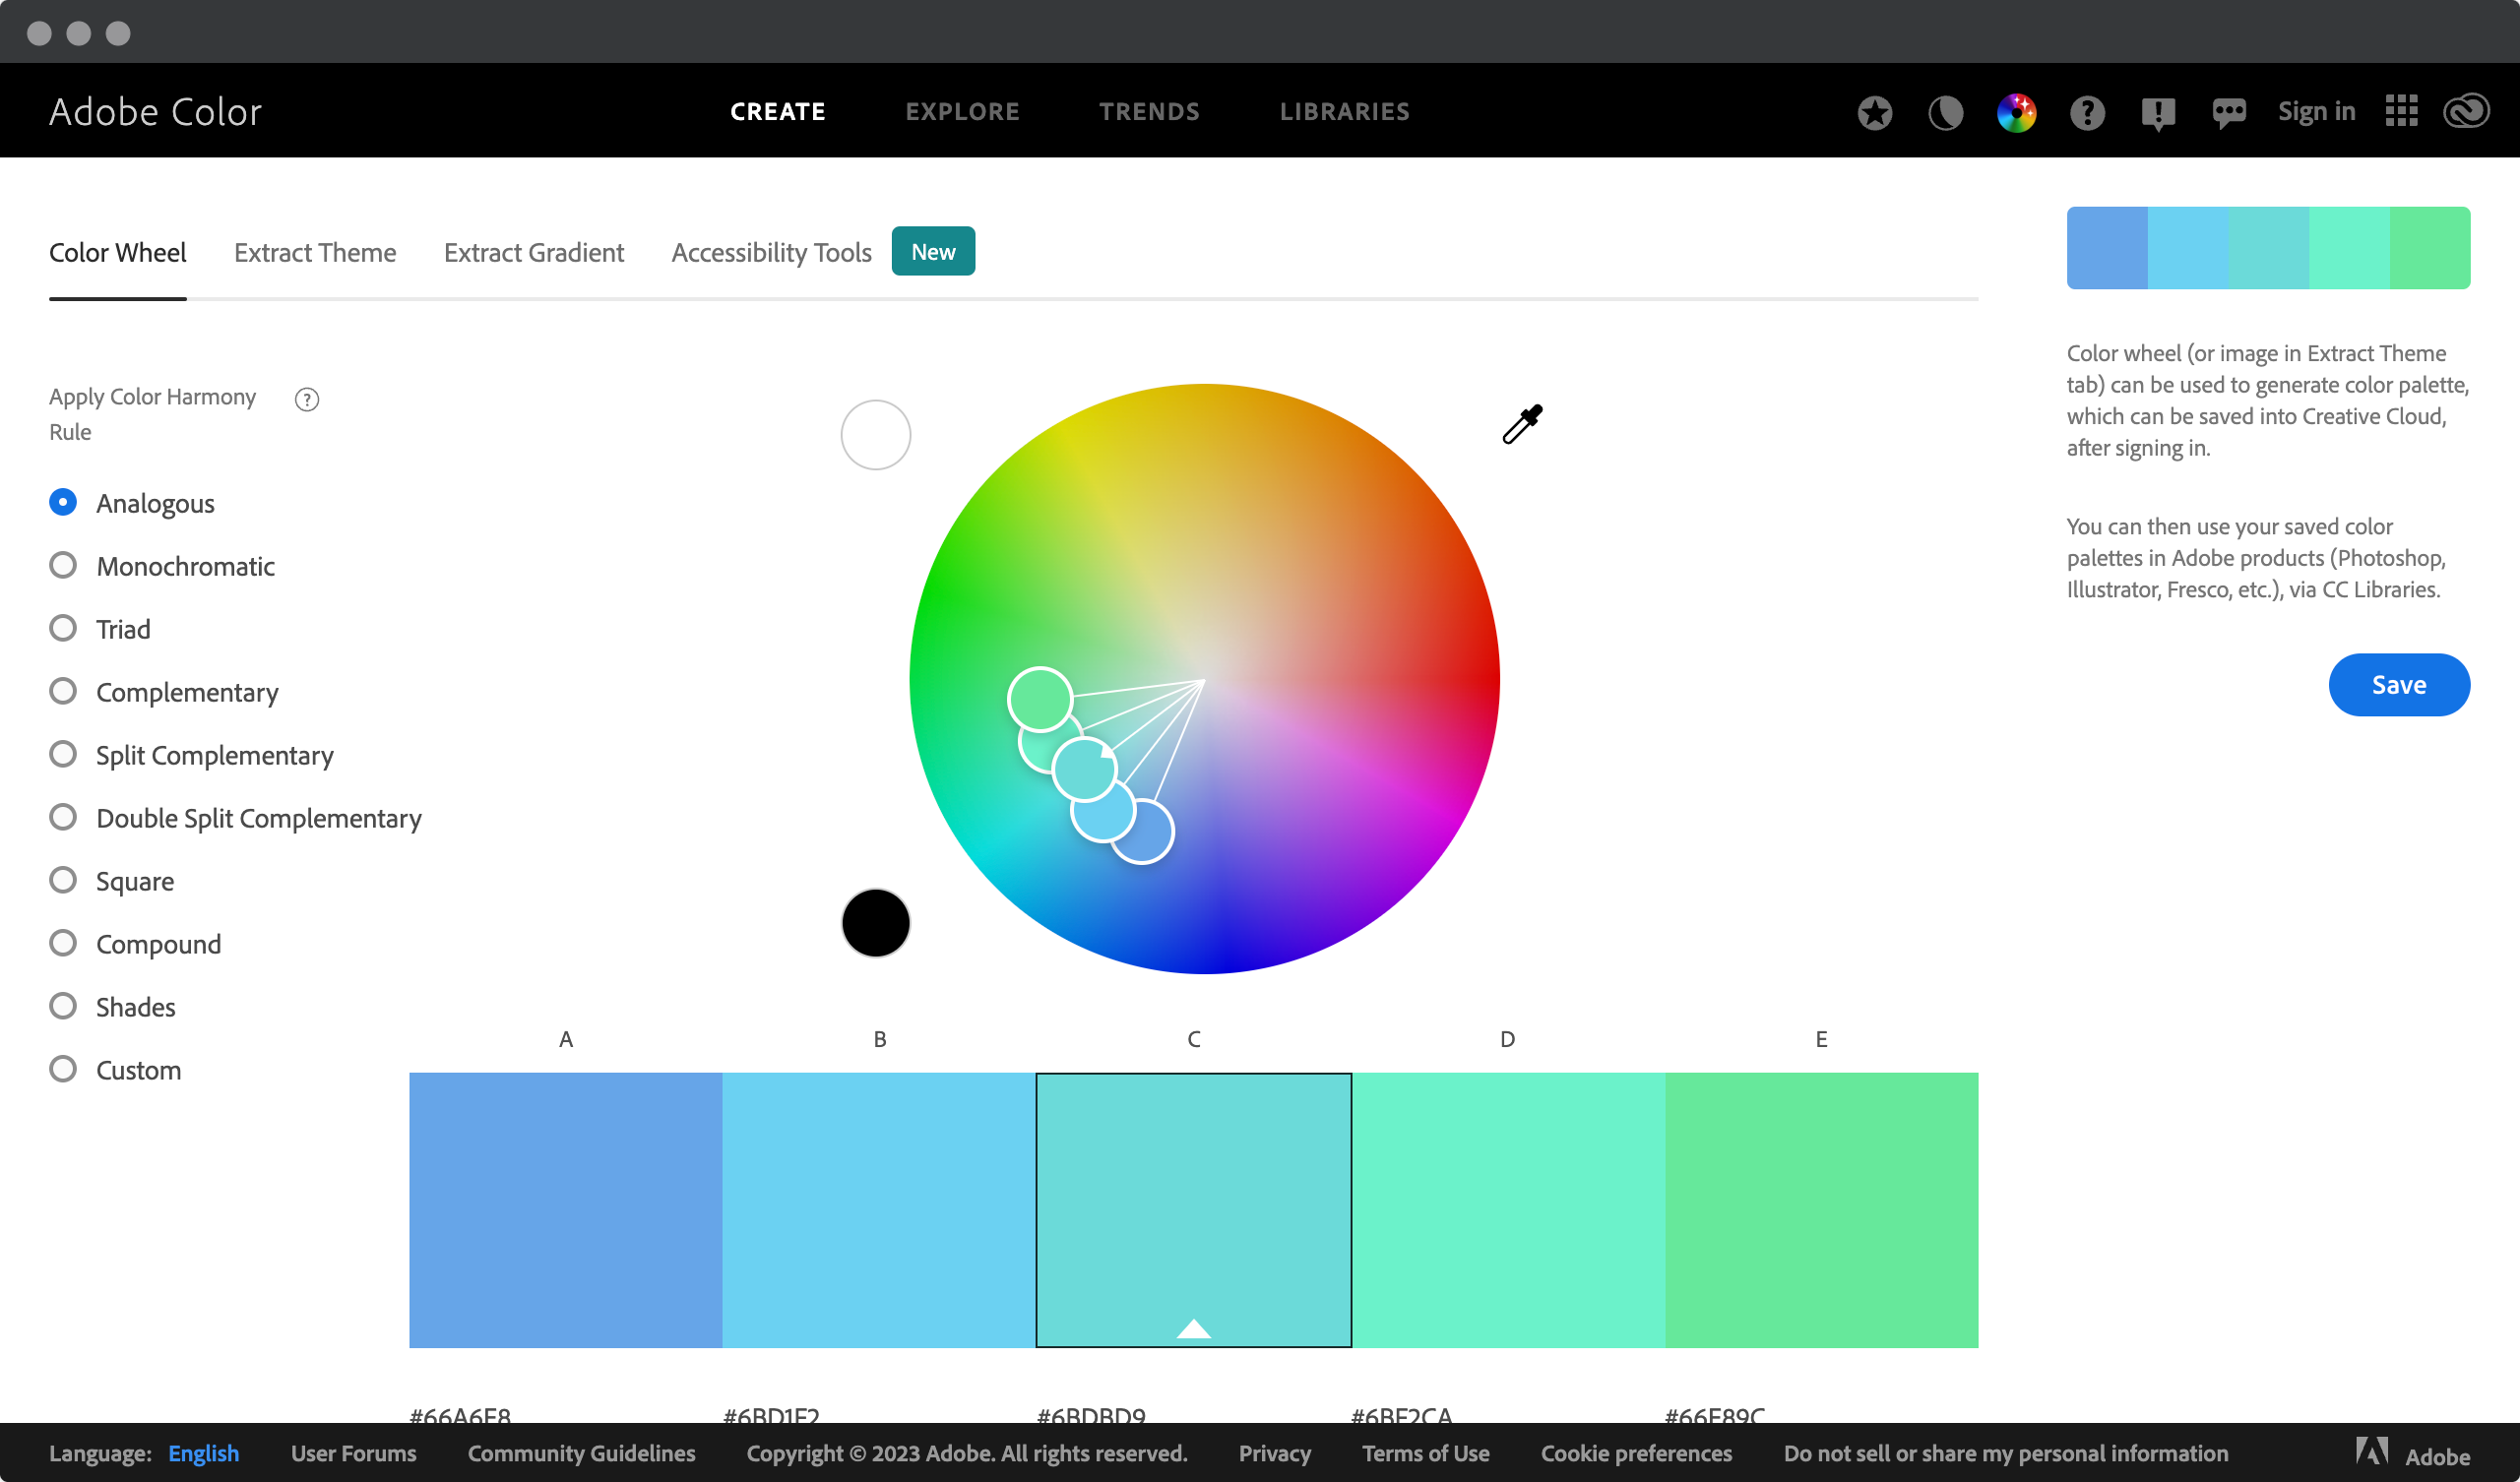 Screenshot of a Web page showing the Adobe Color Wheel tool